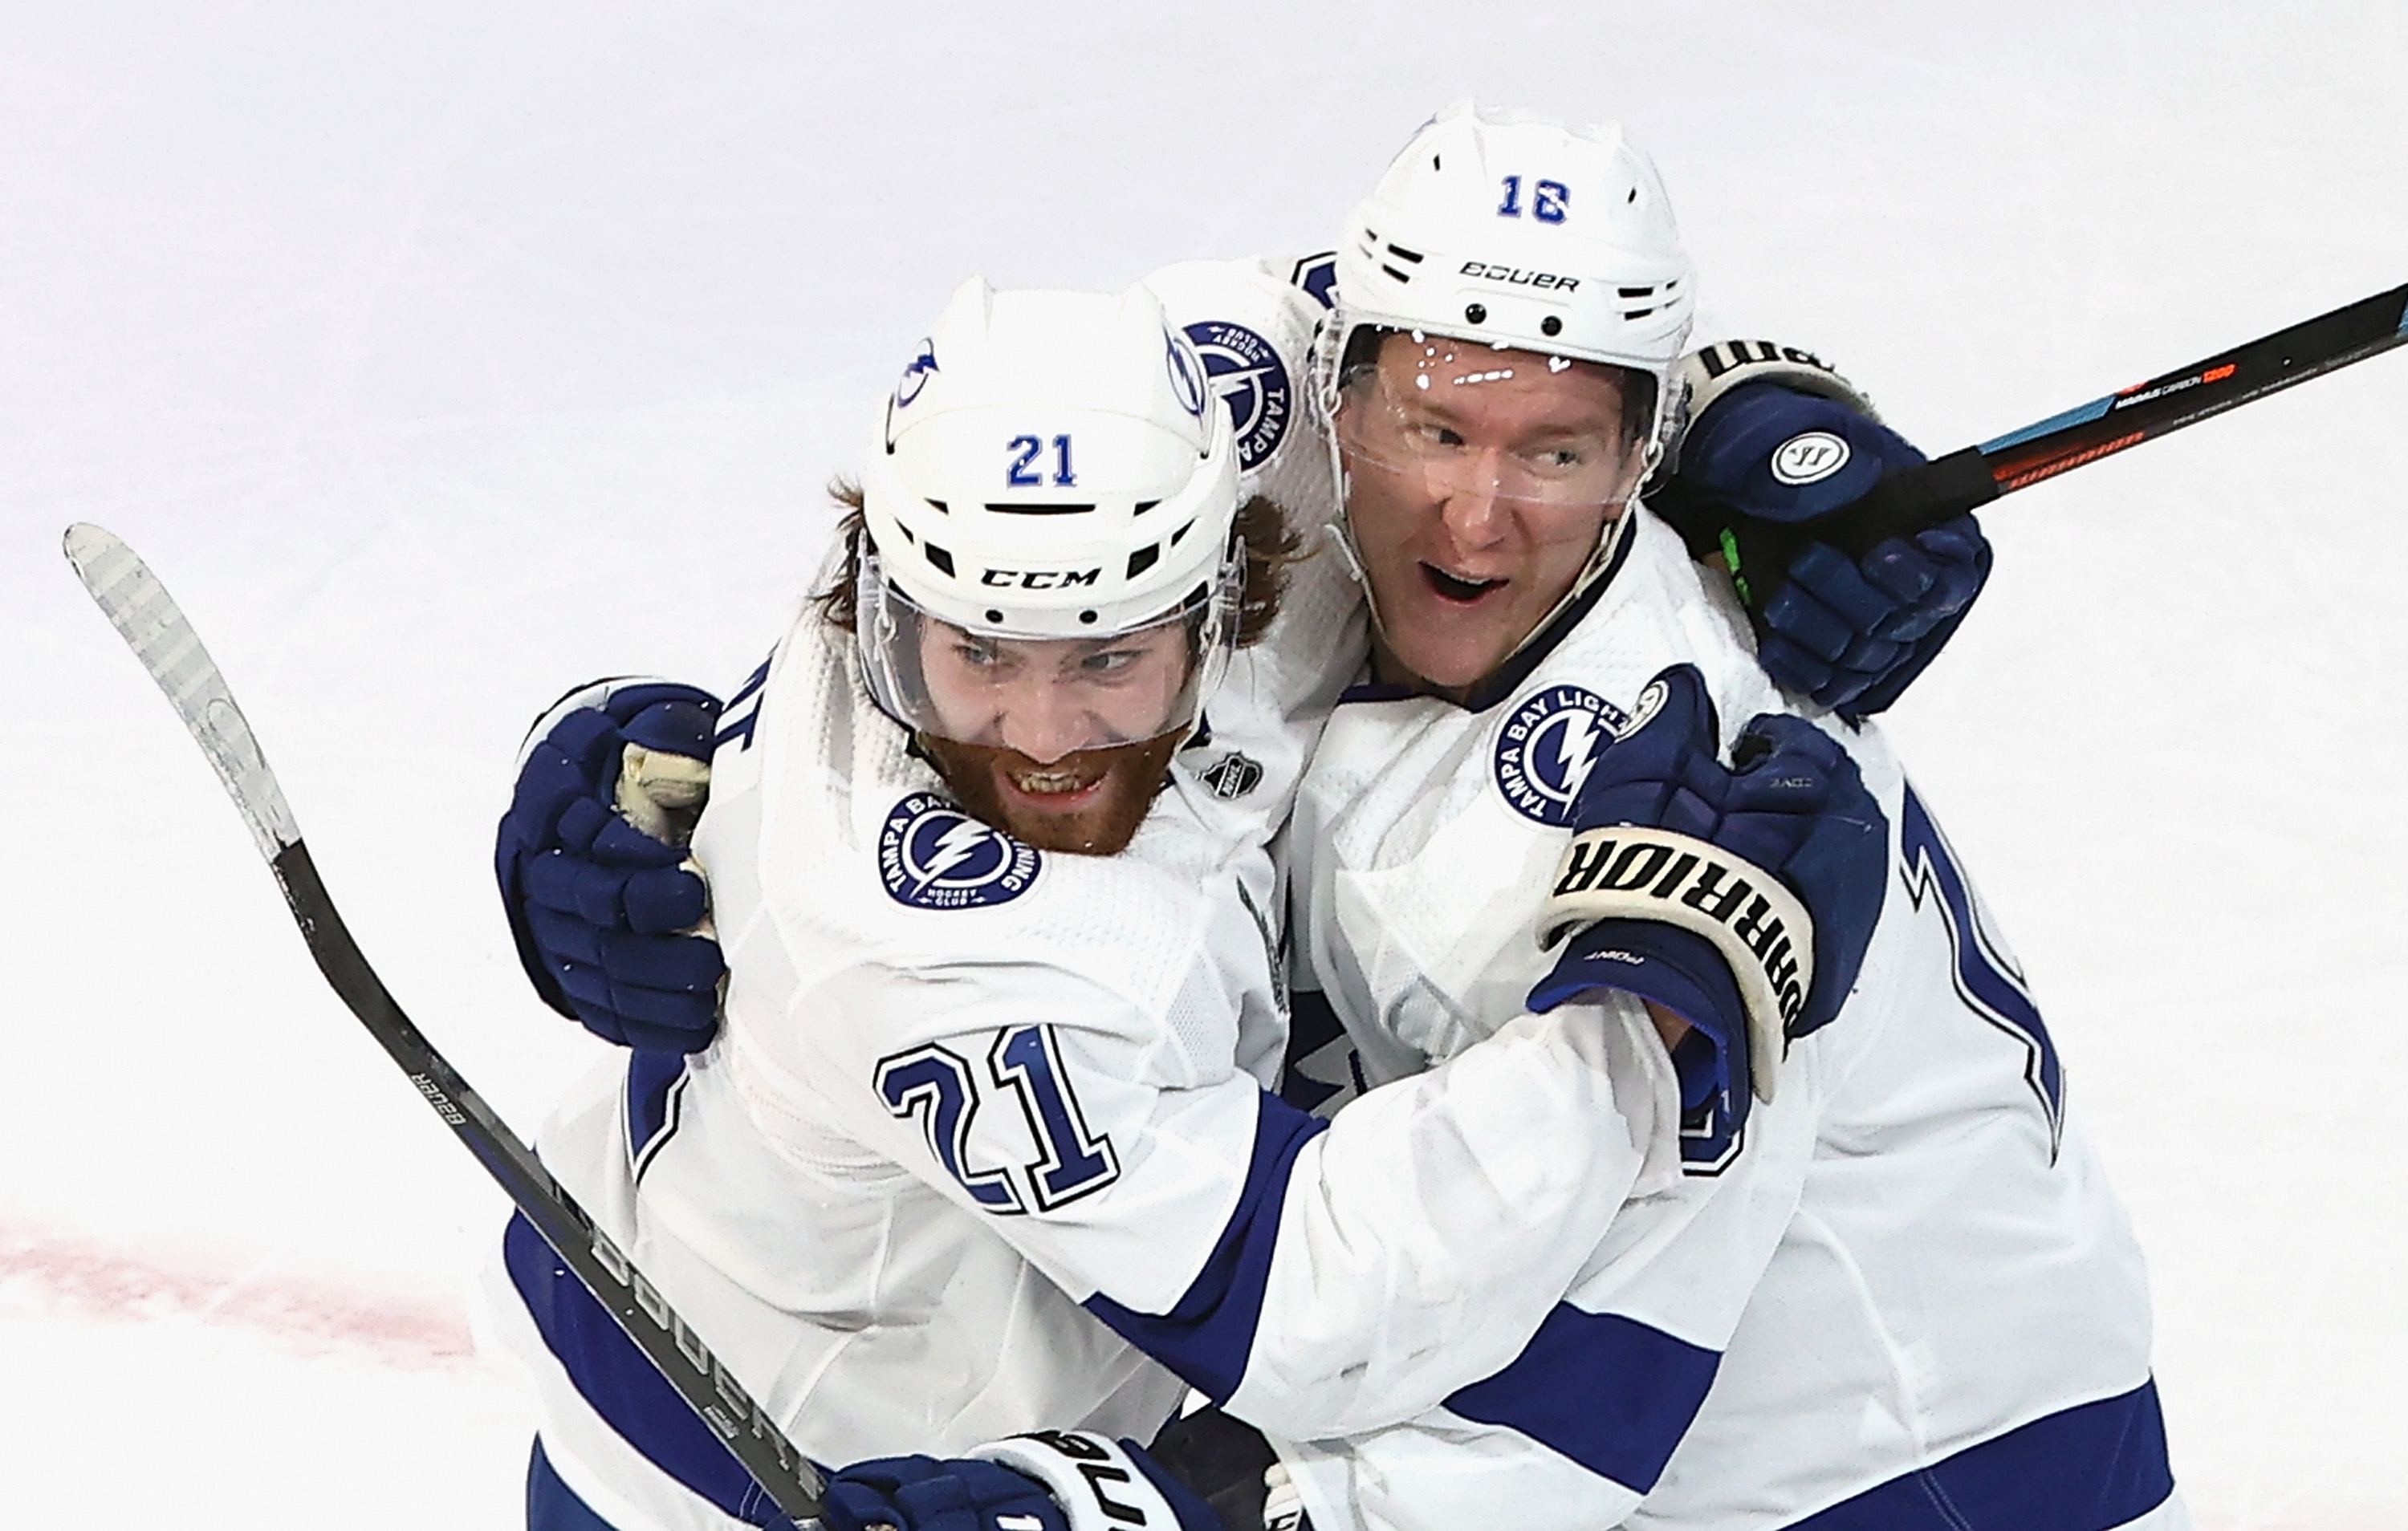 Stanley Cup observations: The Lightning's talent took over in Game